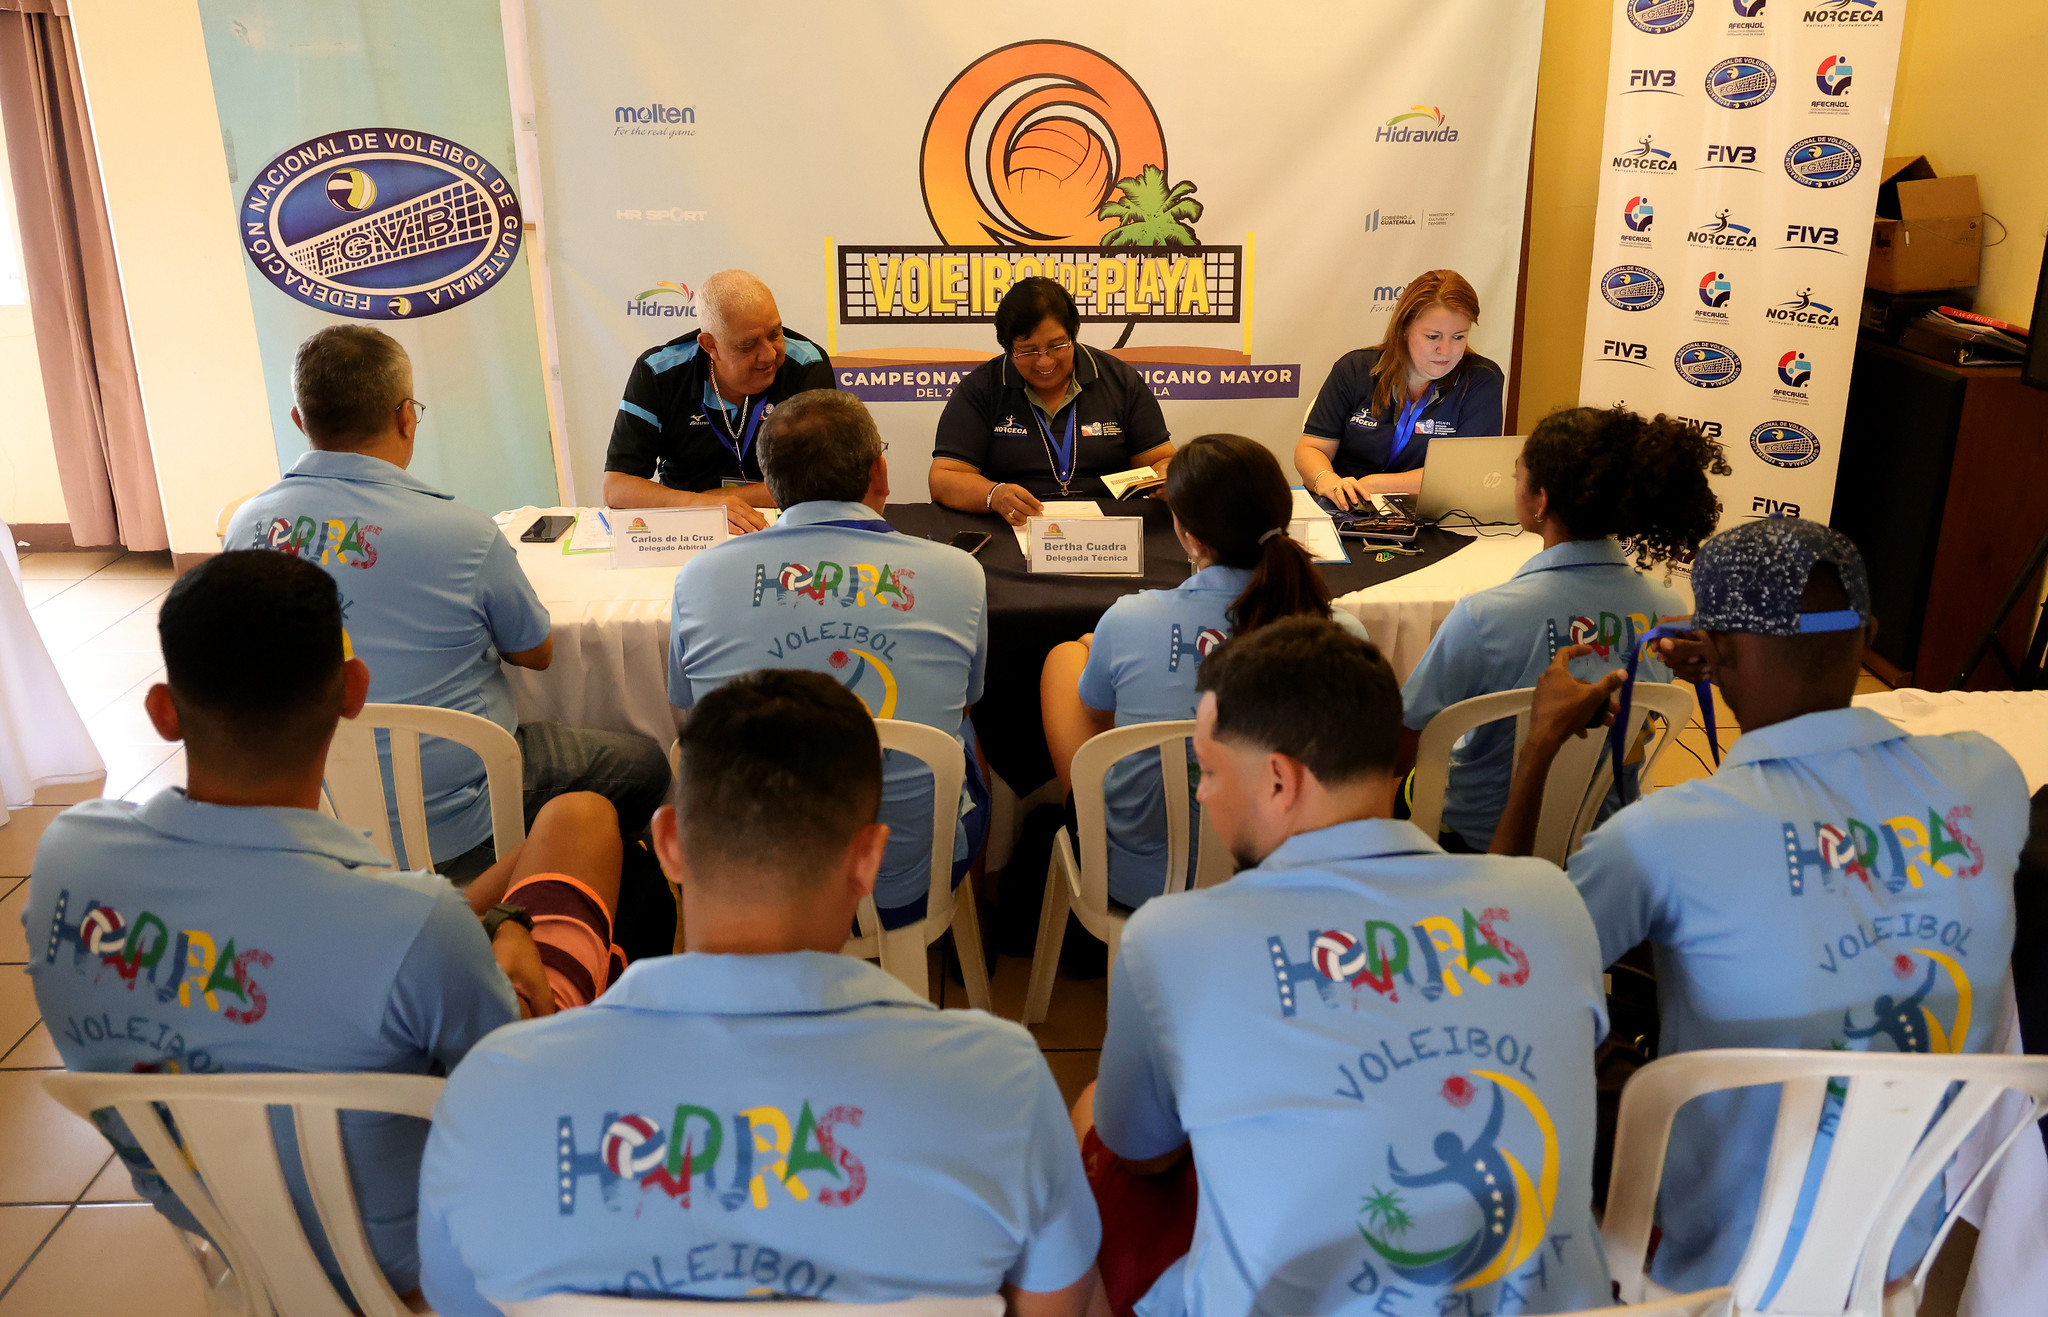 Teams ready for the AFECAVOL Central American Senior Beach Volleyball Championship